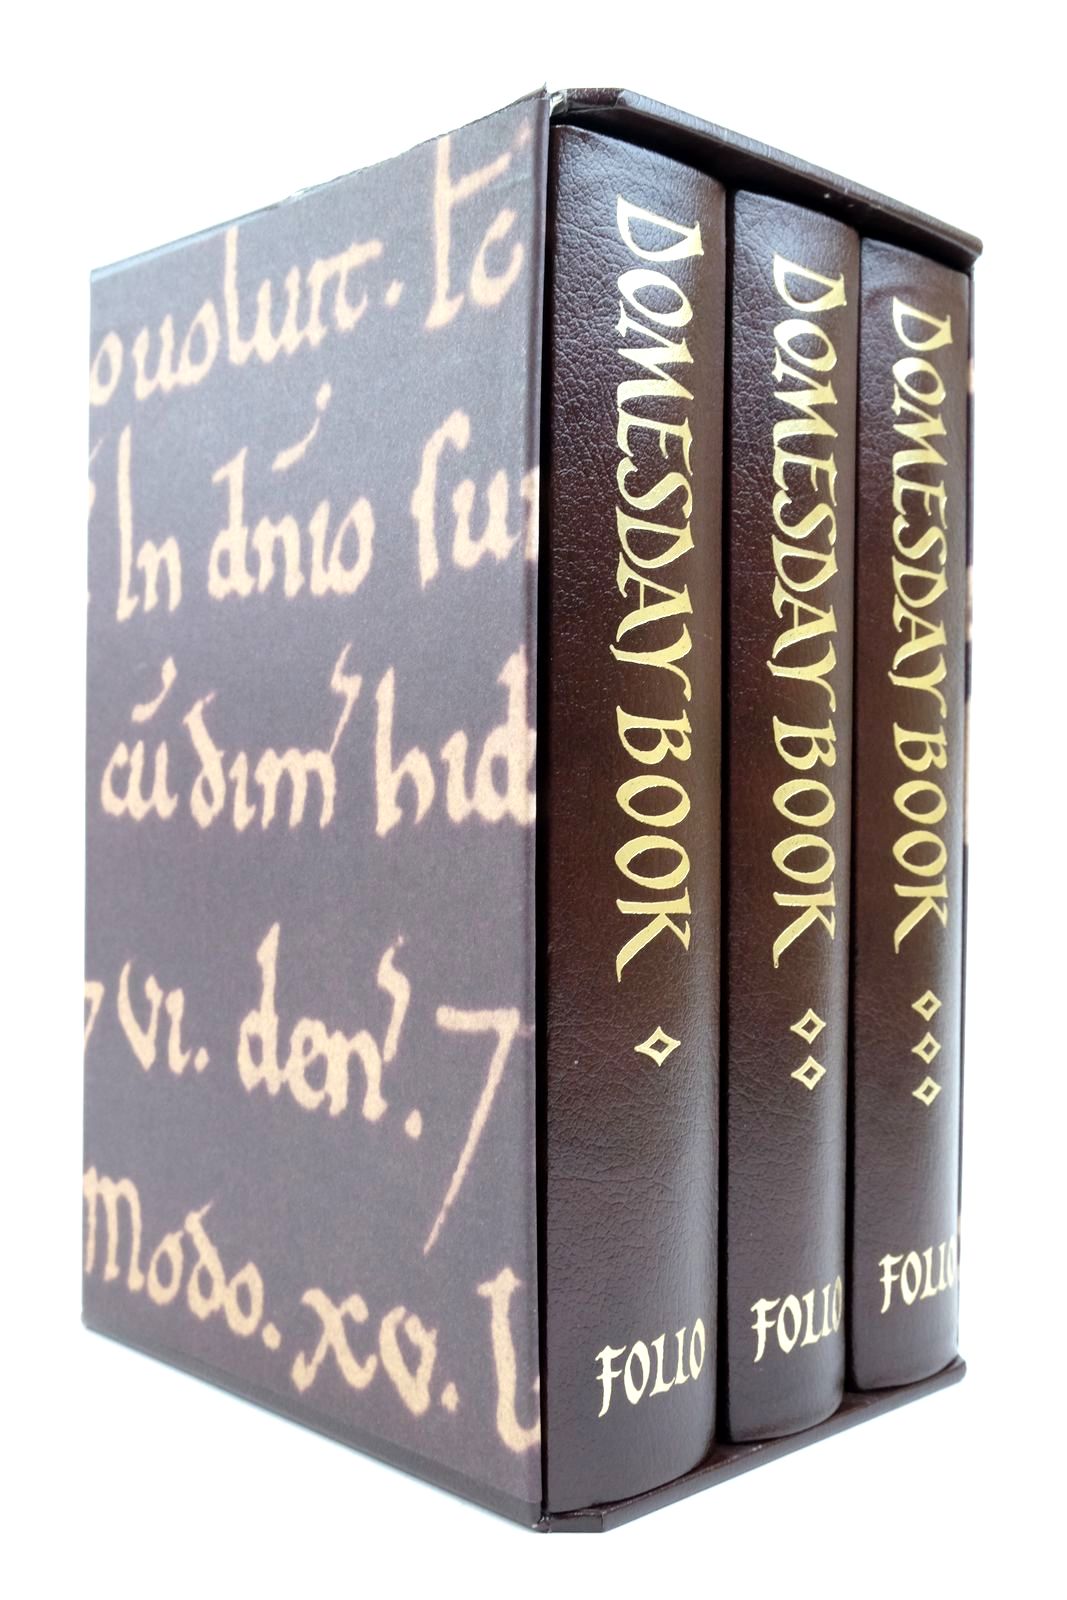 Photo of DOMESDAY BOOK (3 VOLUMES) written by Williams, Ann published by Folio Society (STOCK CODE: 2138633)  for sale by Stella & Rose's Books